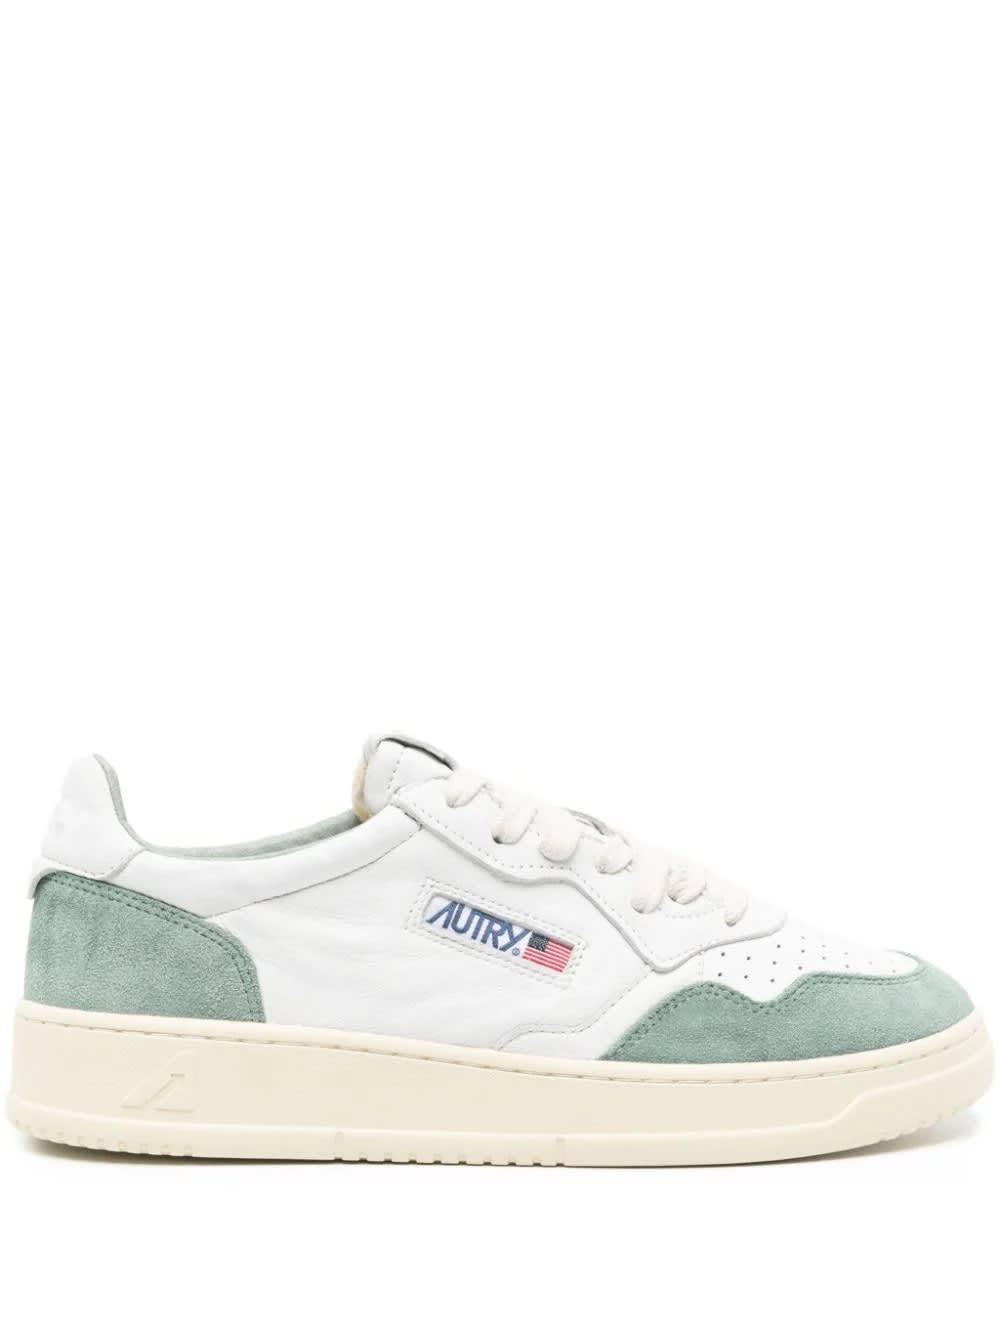 Shop Autry Medalist Low Sneakers In Green Suede And White Leather